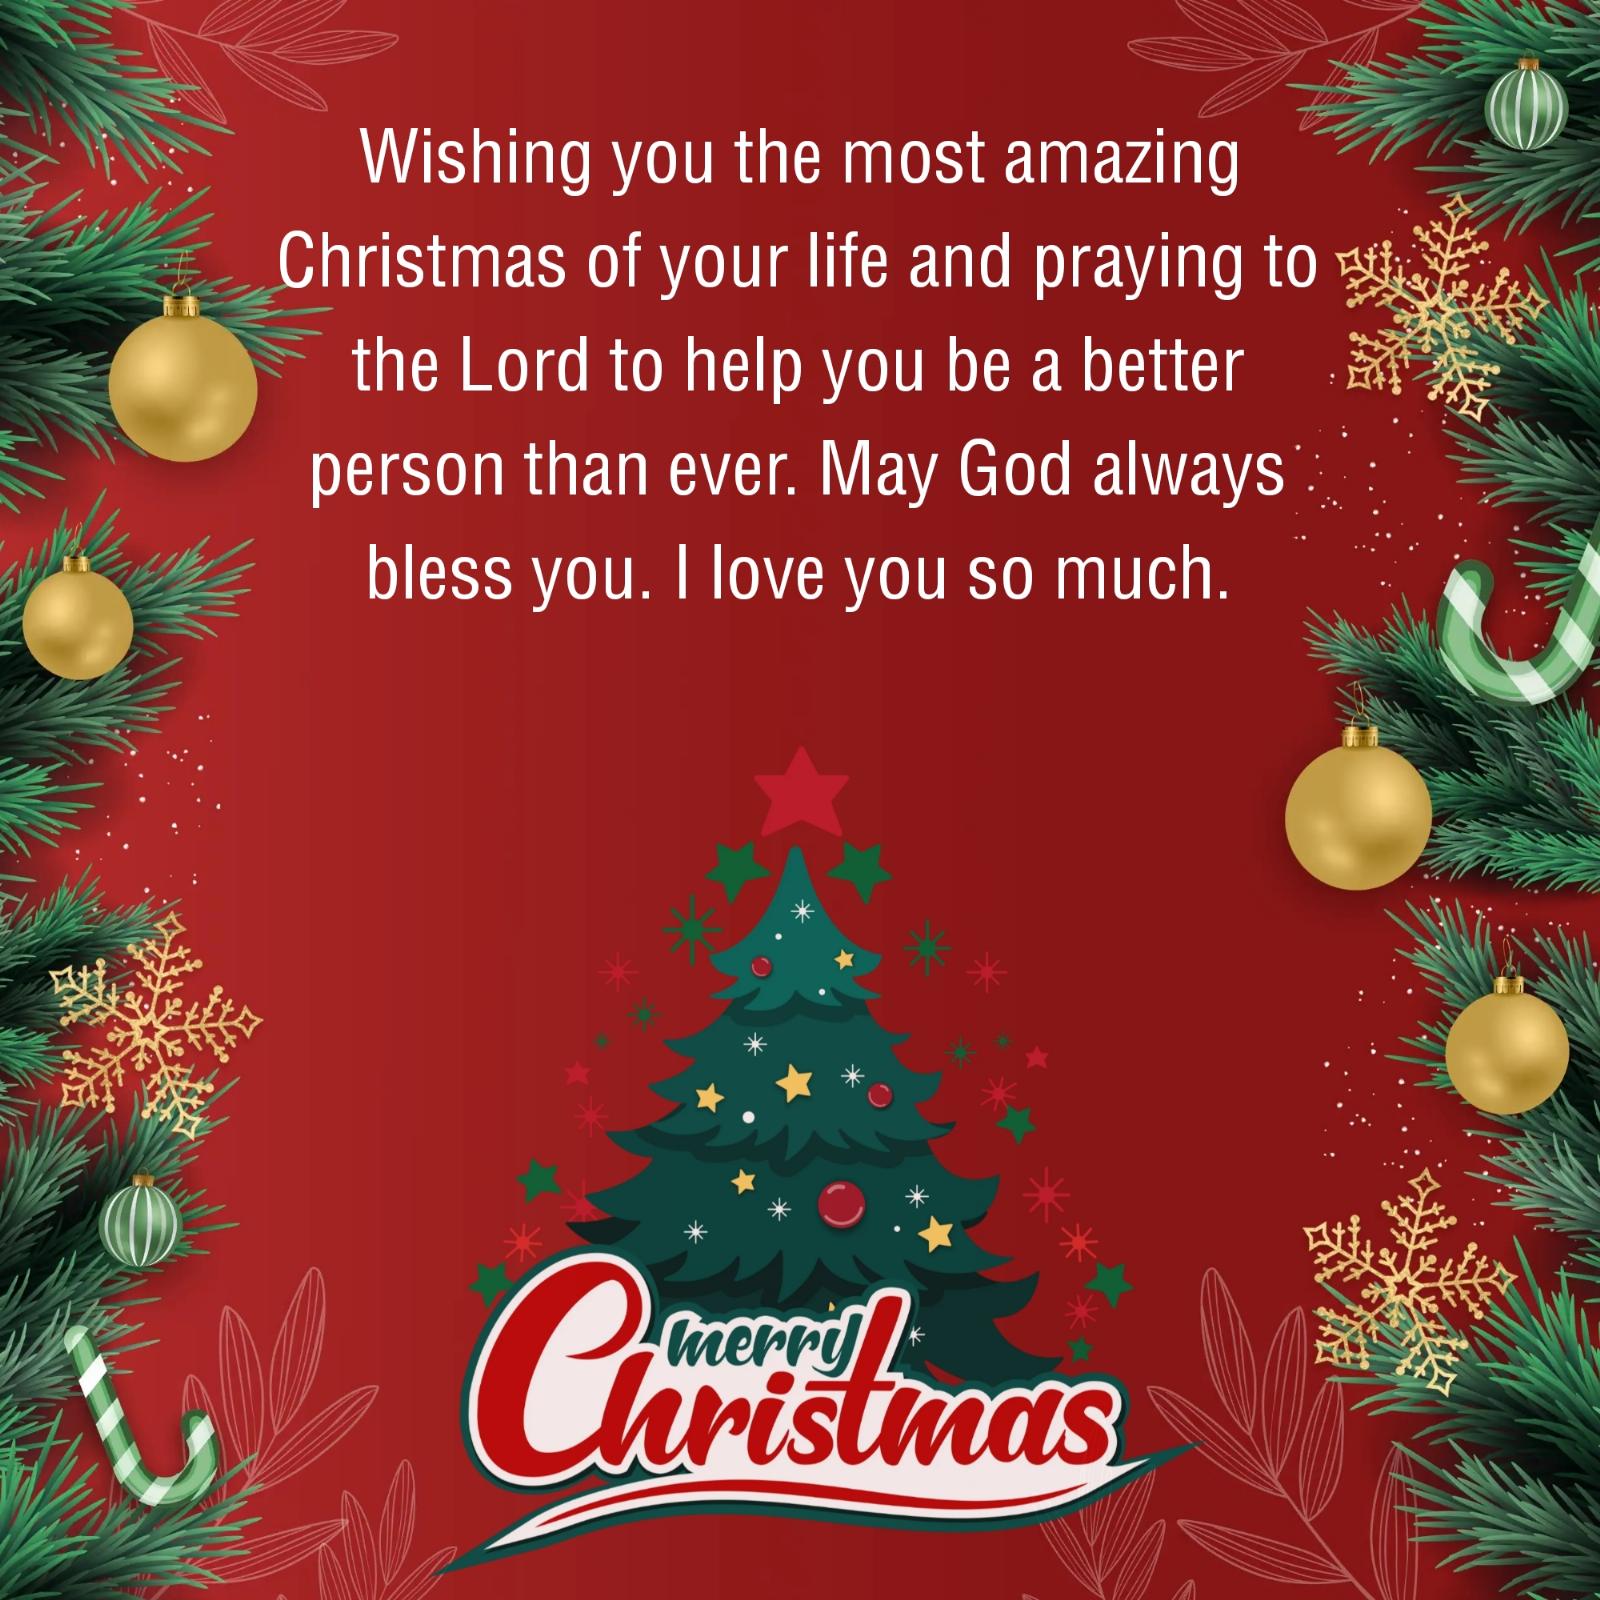 Wishing you the most amazing Christmas of your life